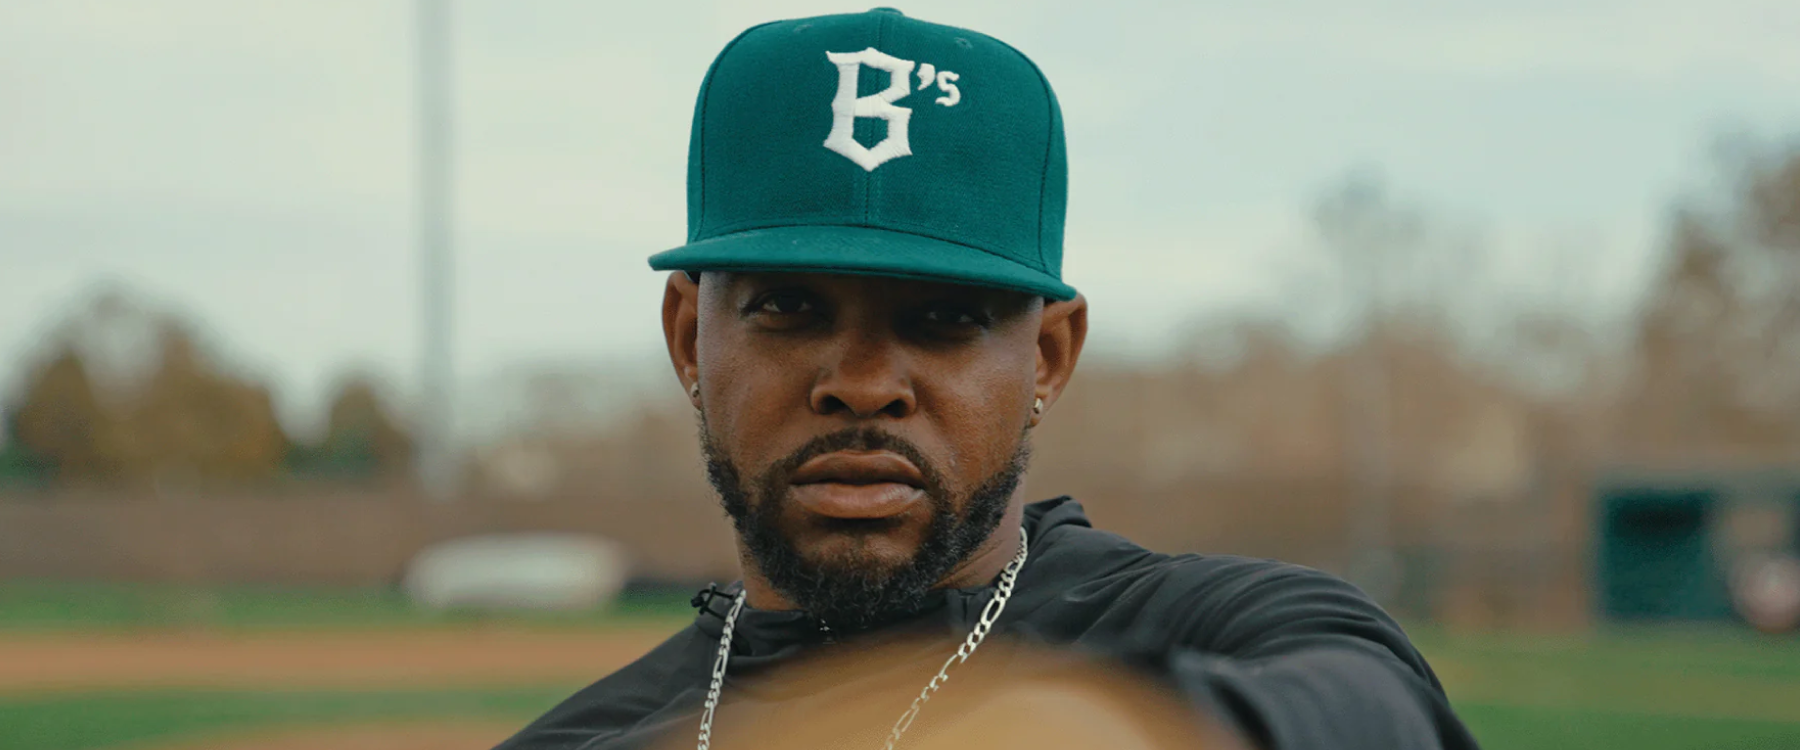 Image of man wearing a green Ballers baseball hat with B's logo.